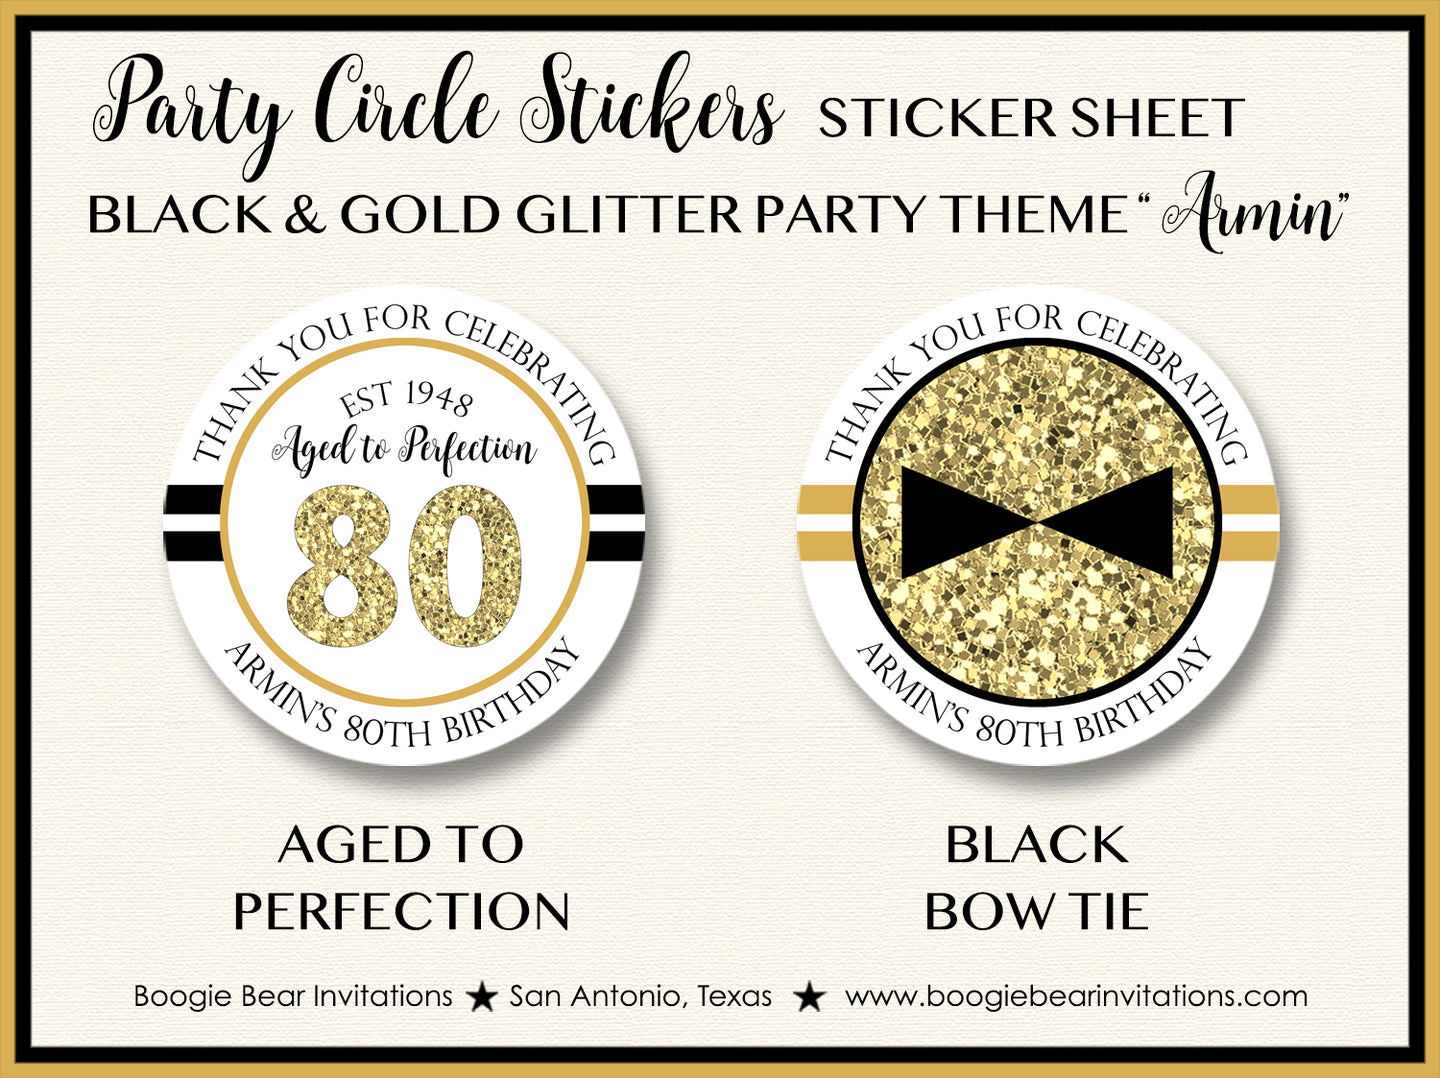 Black Gold Glitter Birthday Party Stickers Circle Sheet Aged to Perfection Boogie Bear Invitations Armin Theme